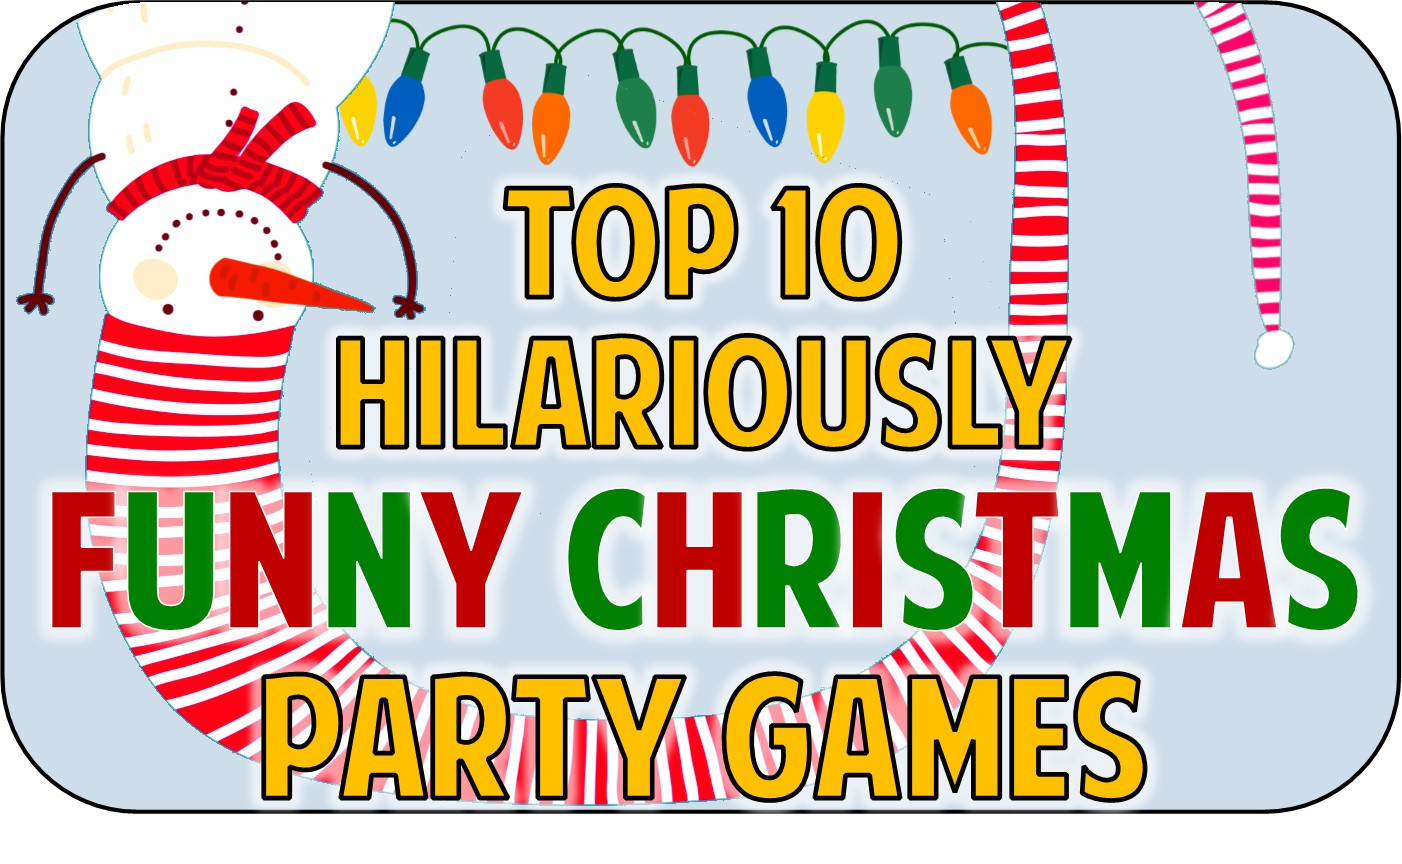 Teen Christmas Party Ideas
 Christmas Party fice Games